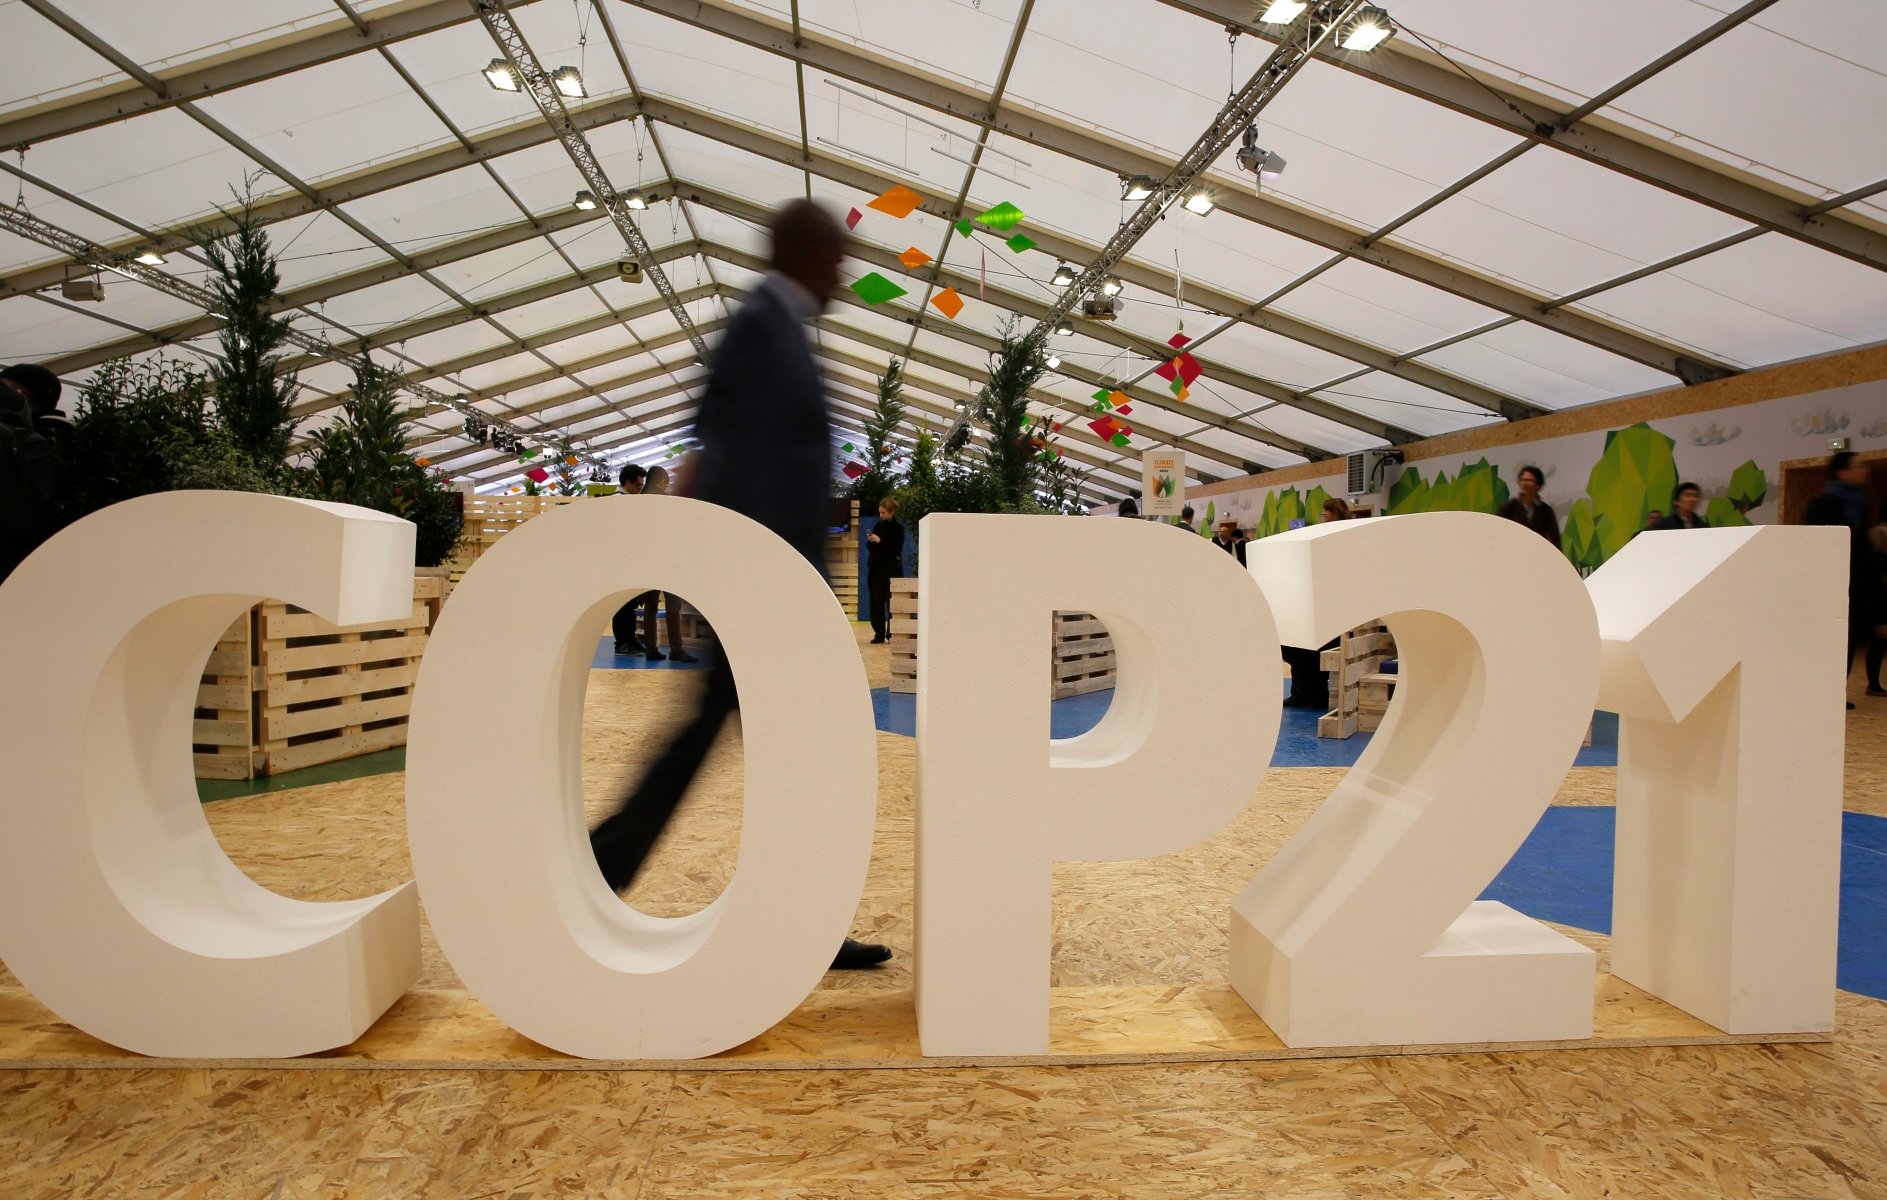 A man visits the Climate Generations Areas, part of the COP21, the United Nations Climate Change Conference Tuesday, Dec. 1, 2015 in Le Bourget, north of Paris.  (AP Photo/Christophe Ena) France Climate Countdown